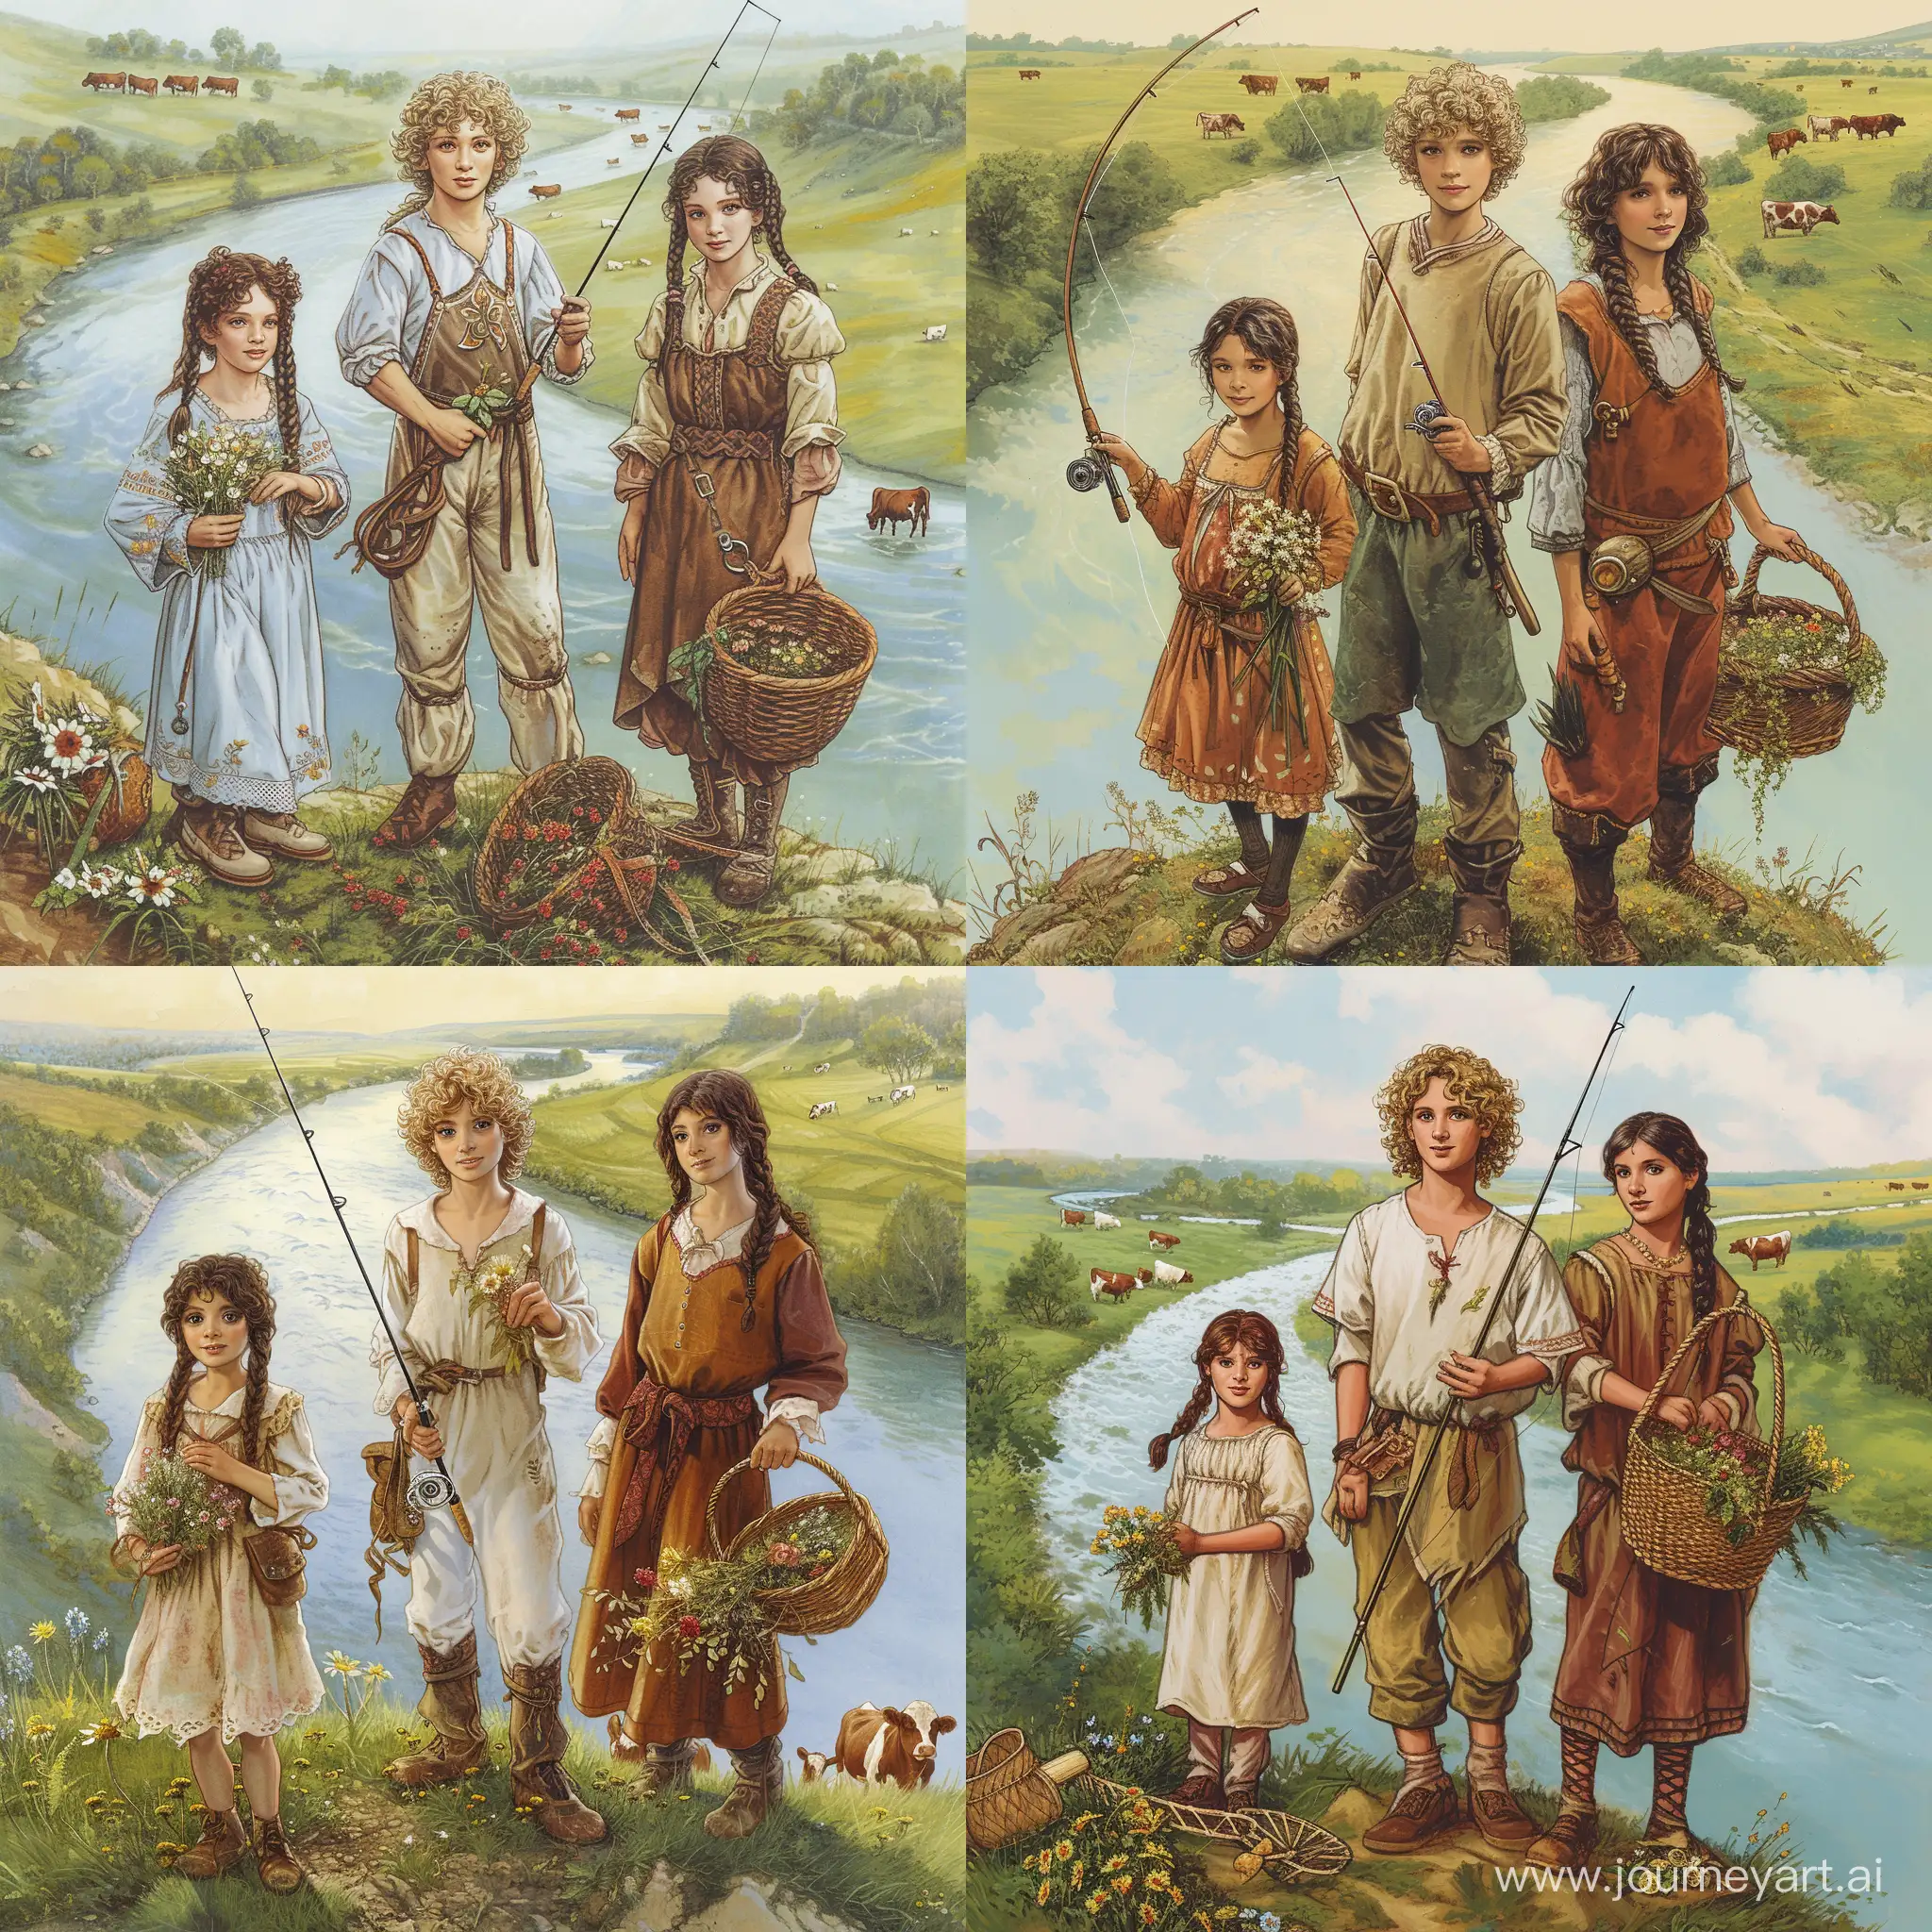 Family-Fishing-Day-on-the-Sunny-Hillside-with-Wildflowers